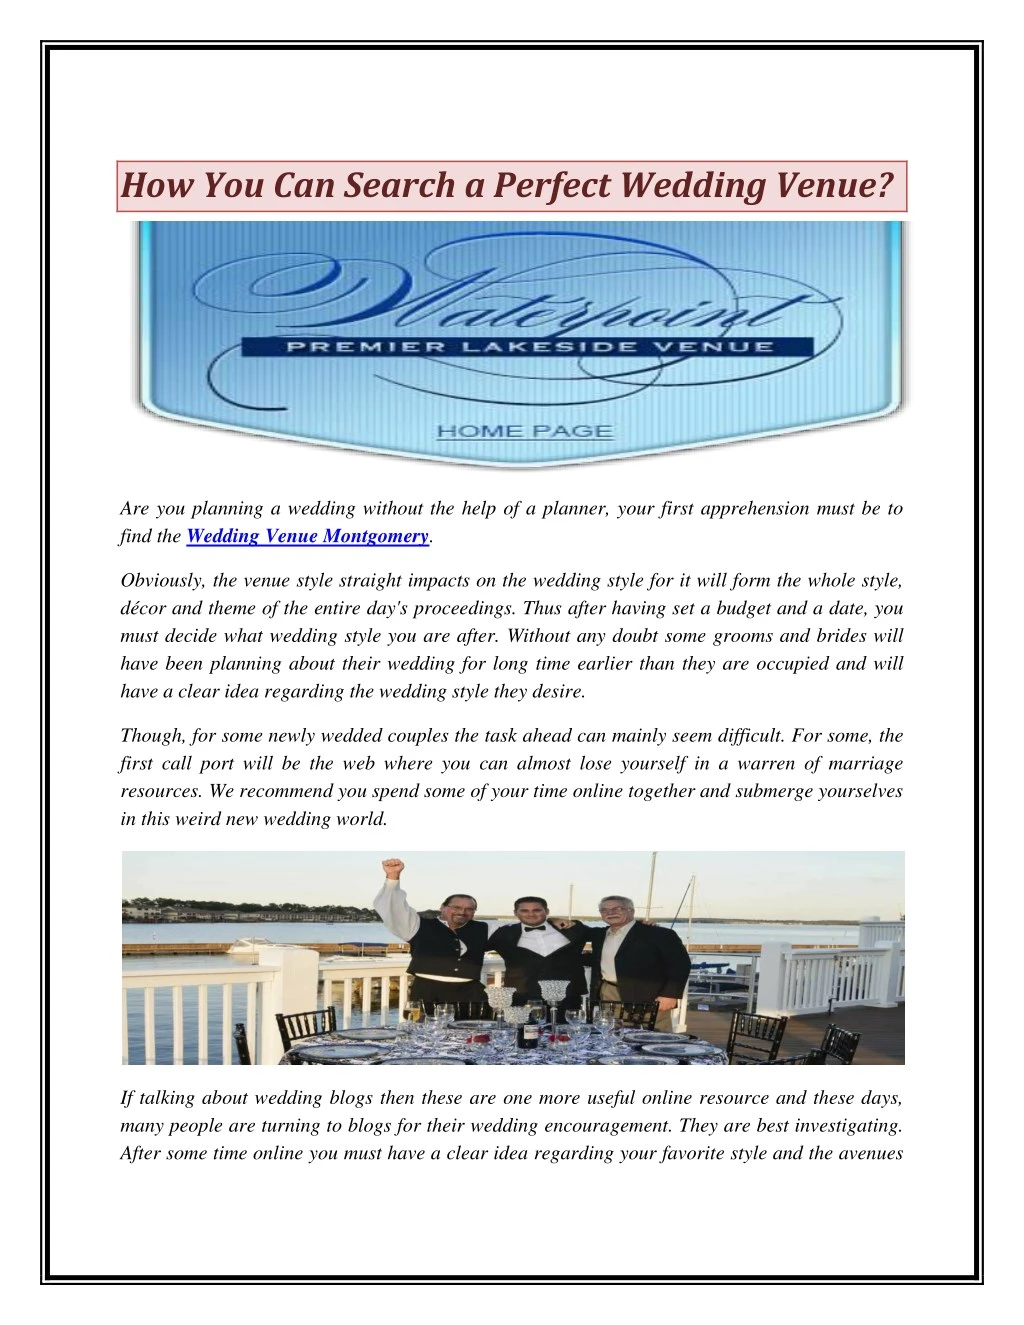 how you can search a perfect wedding venue